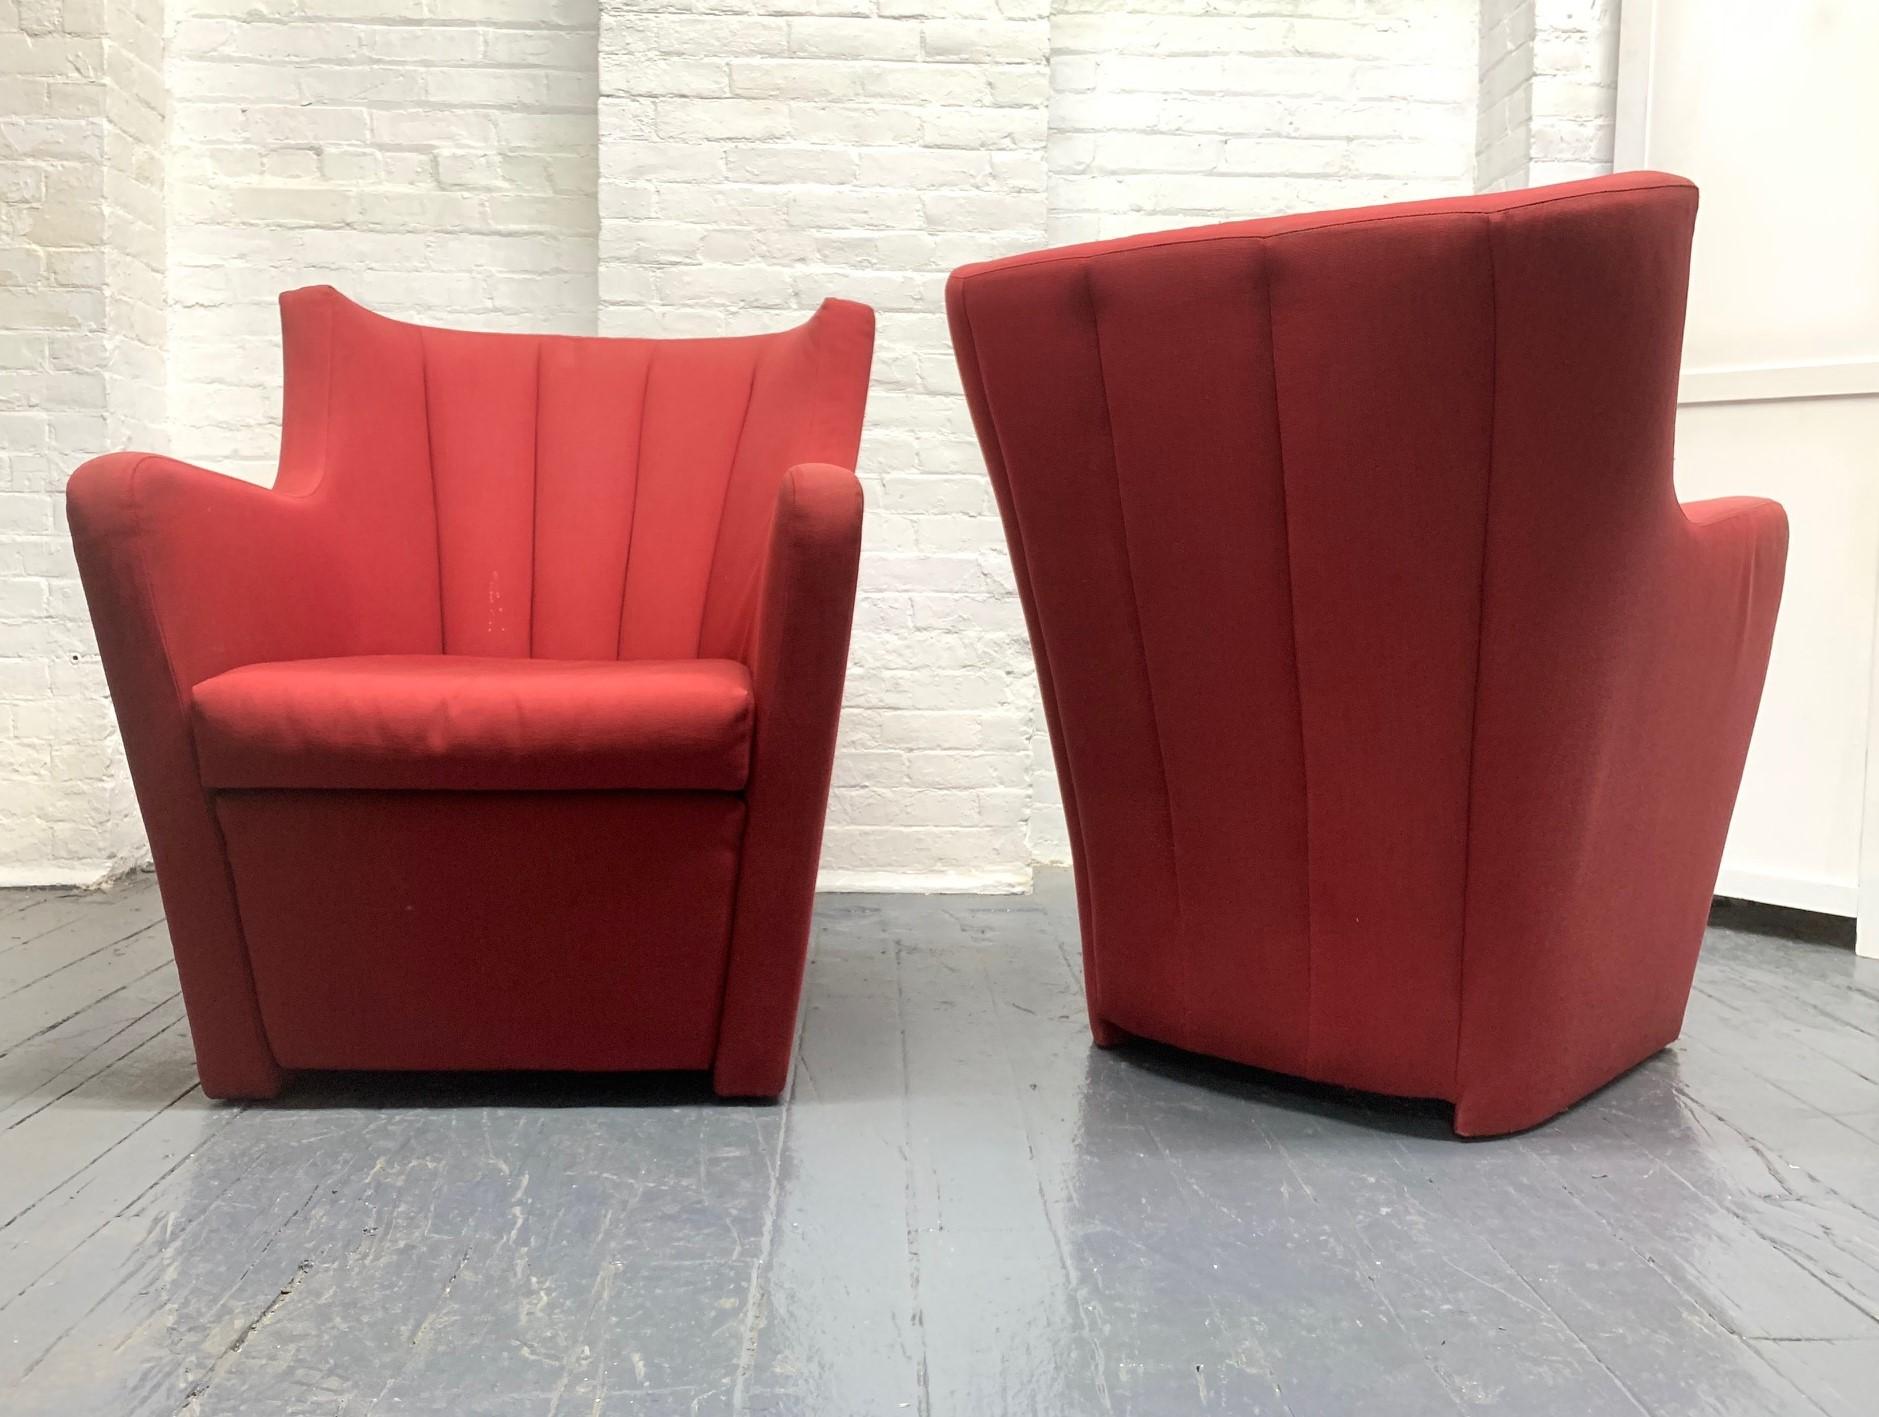 Pair of Redele lounge chairs by Gerrit Rietveld for Cassina. The chairs have the original upholstery.